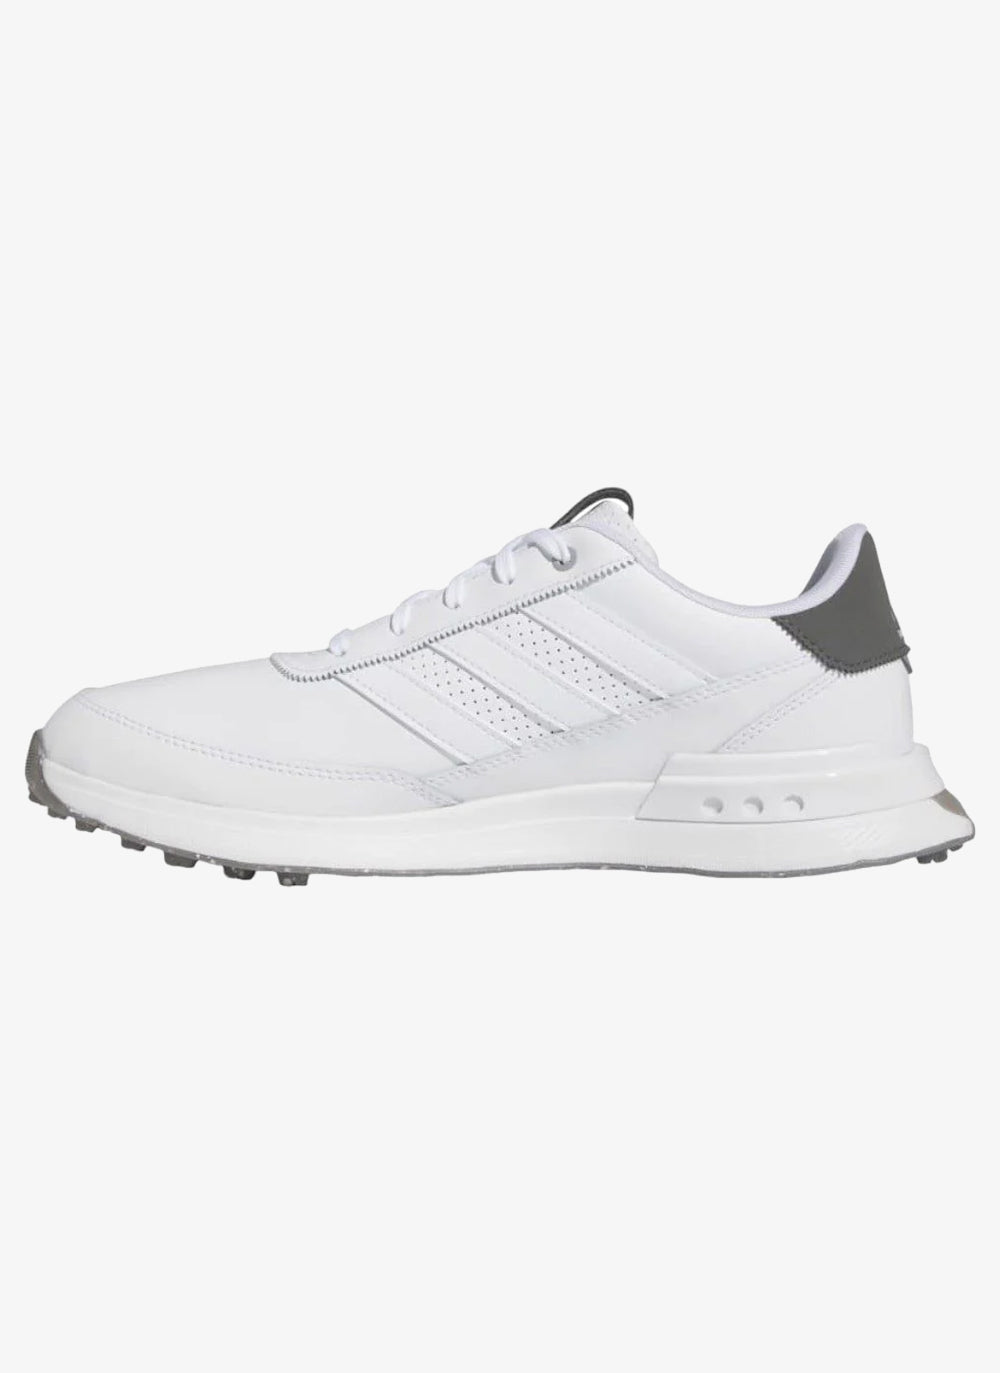 adidas S2G SL Leather Golf Shoes IF0298